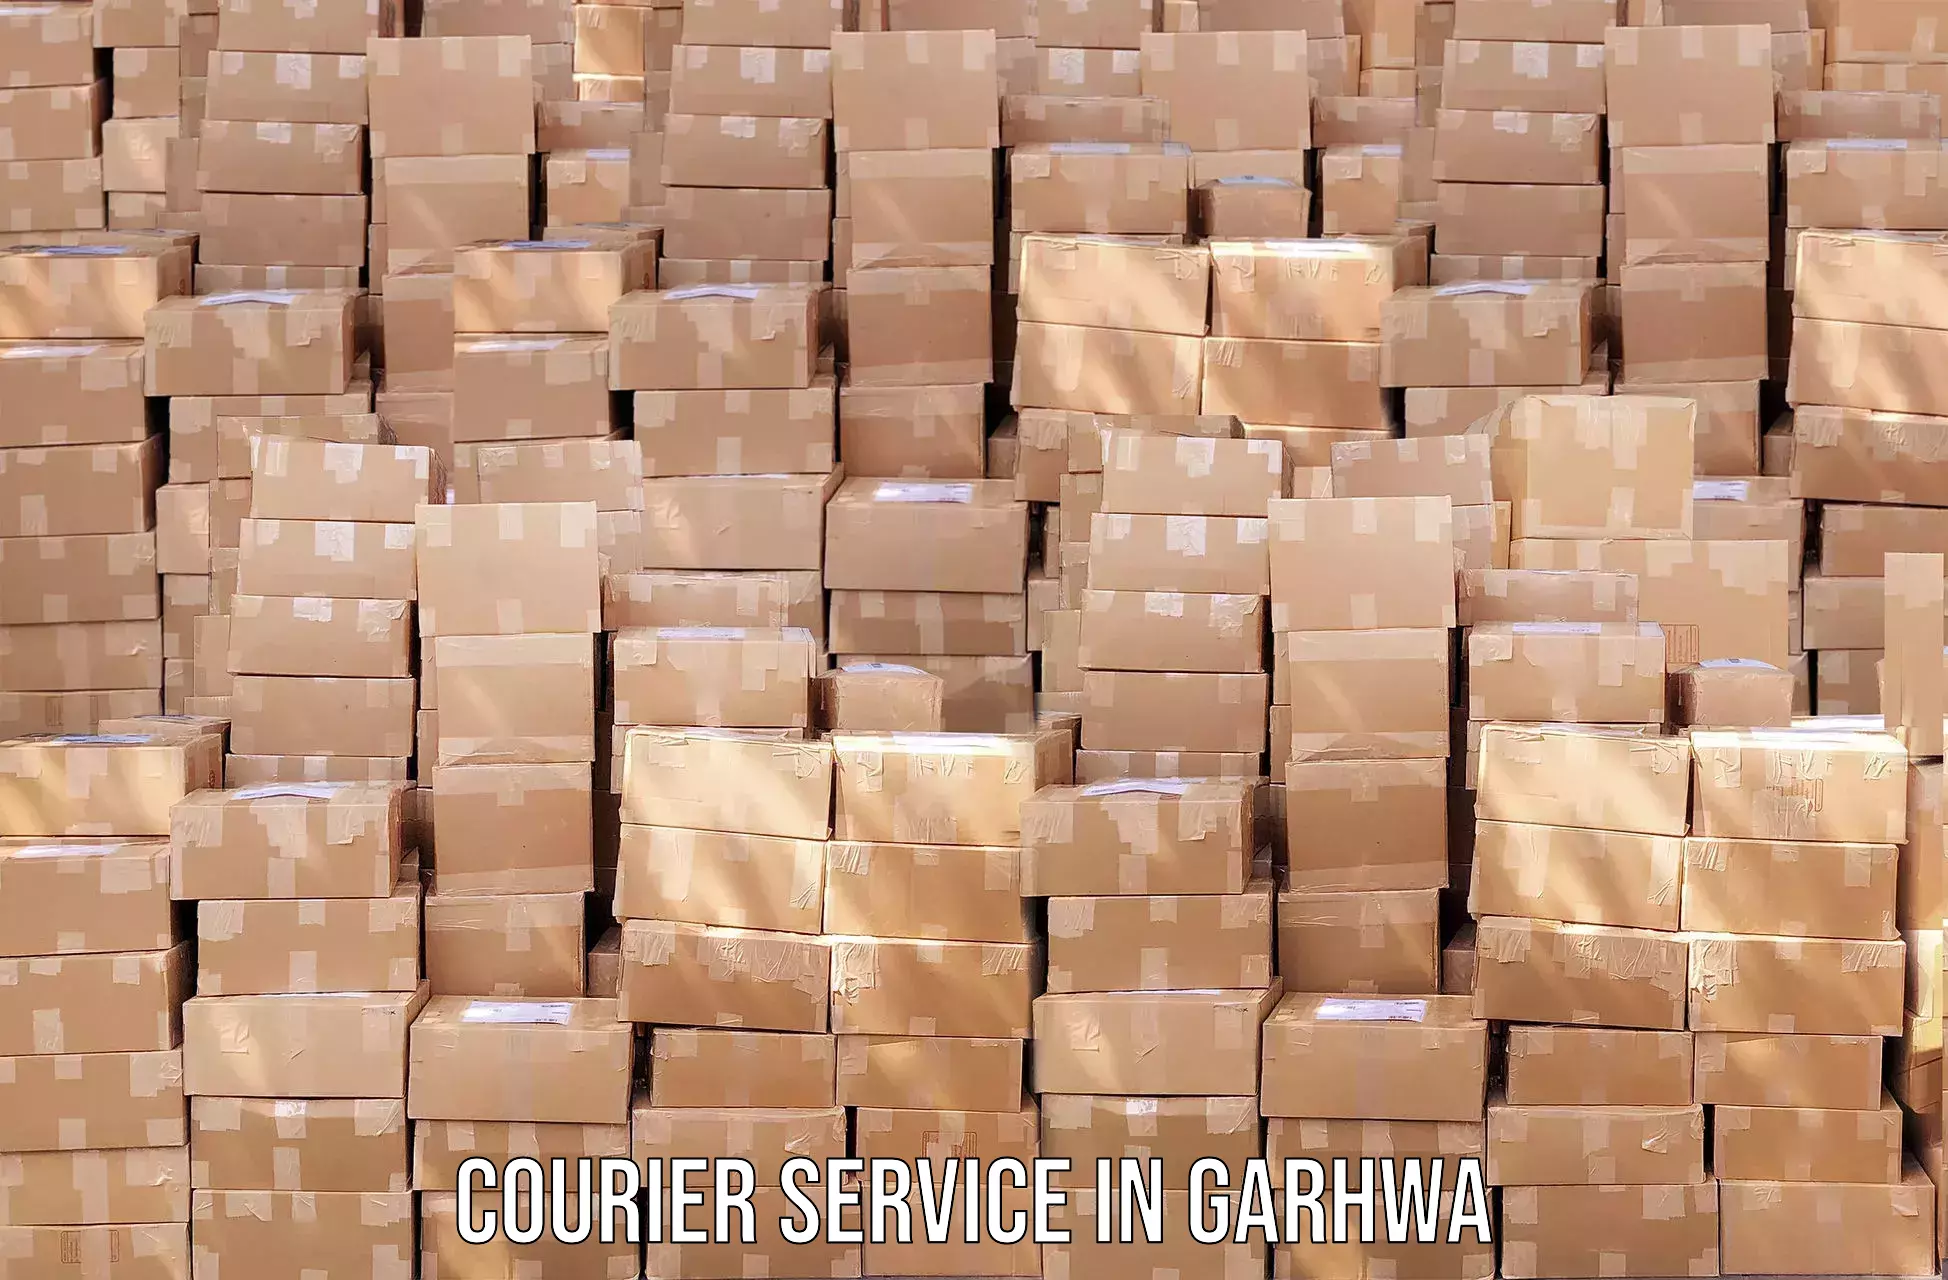 Express delivery capabilities in Garhwa